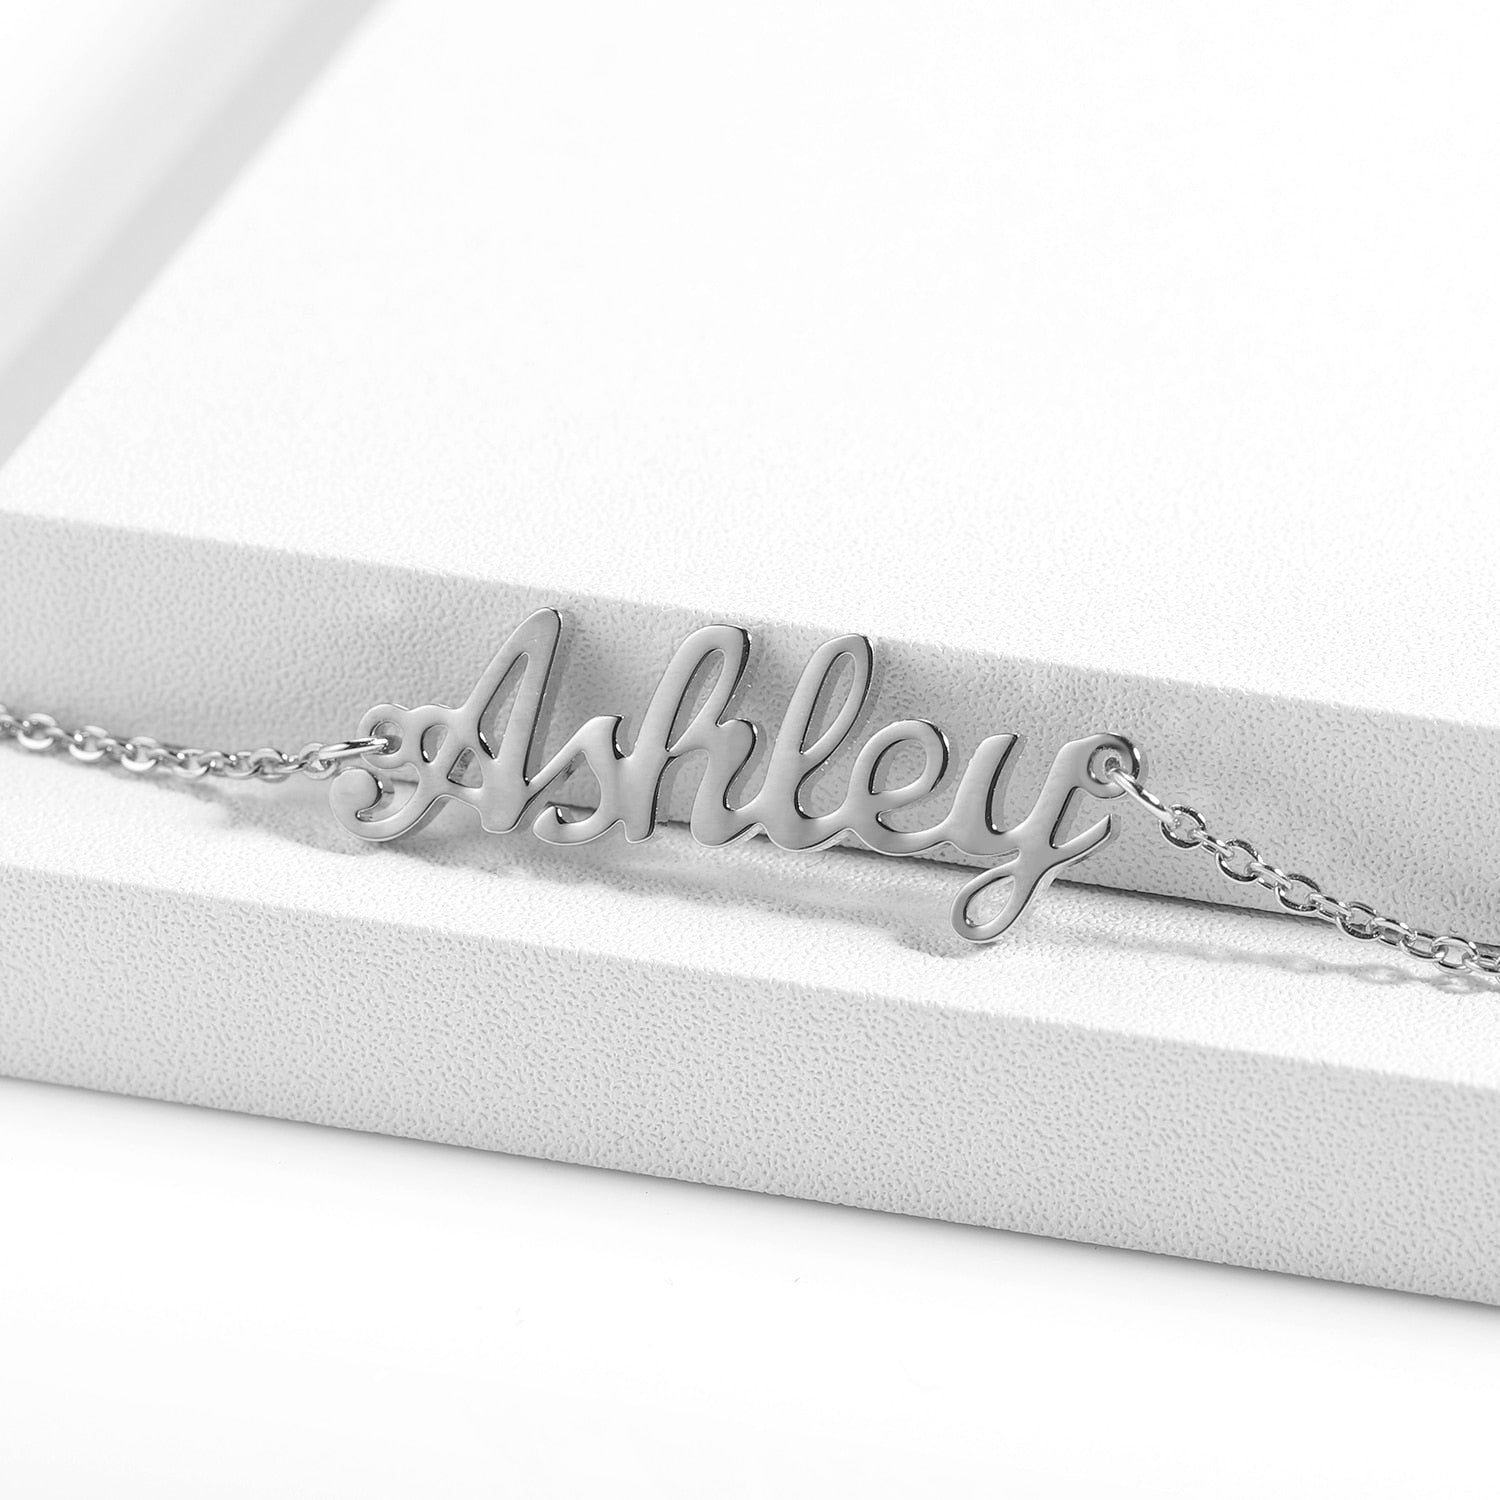 Custom name anklet is a custom jewelry item with fast reliable shipping